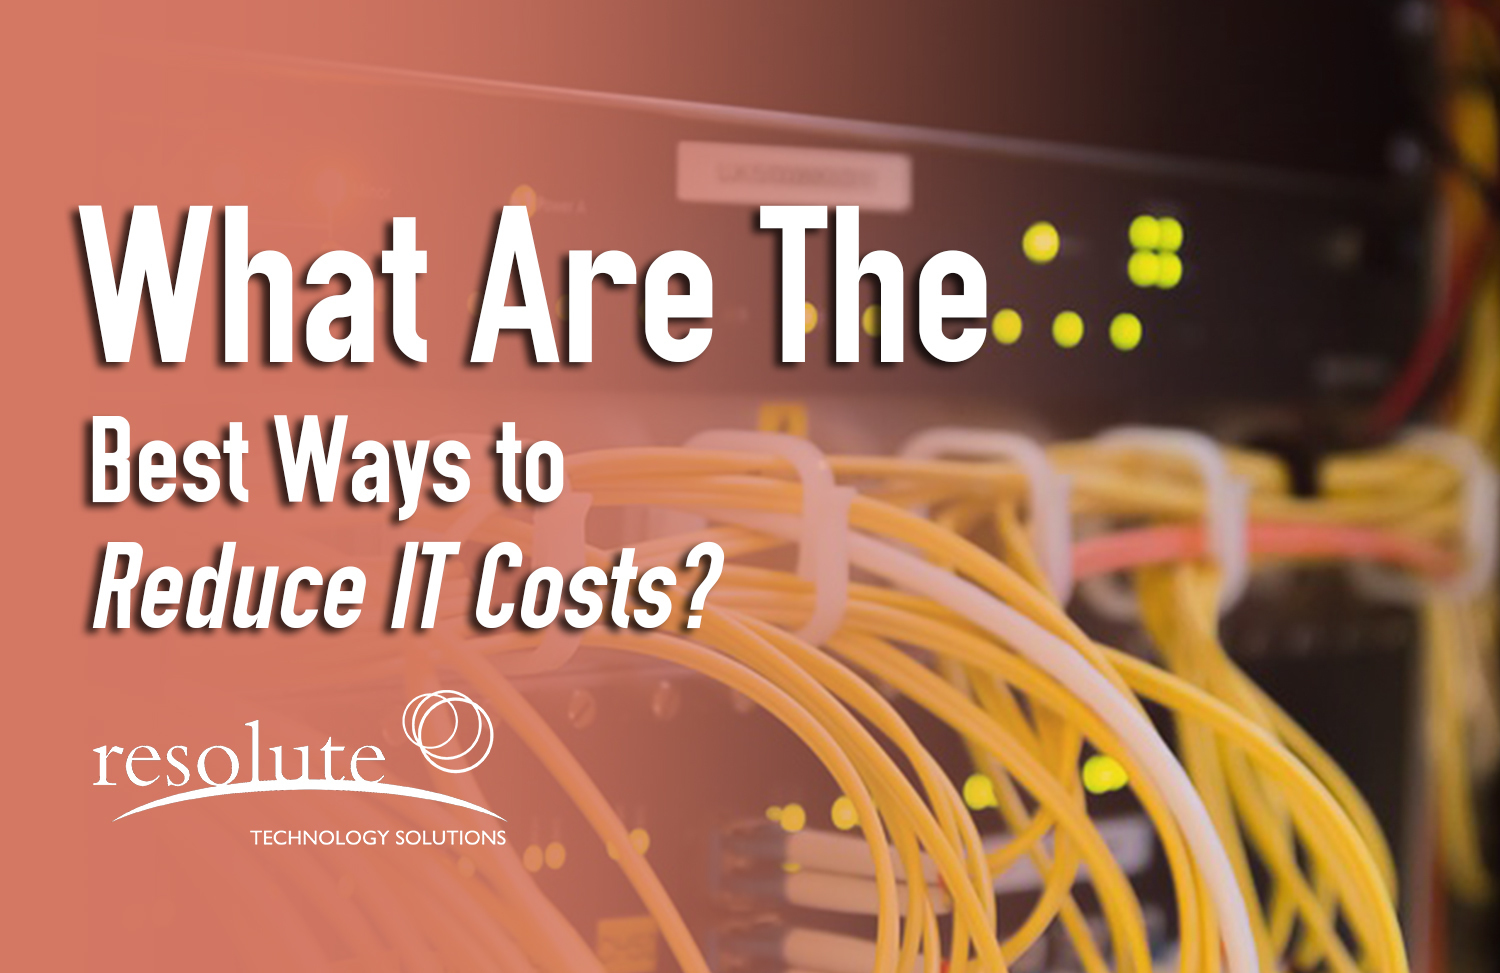 What Are the Best Ways to Reduce IT Costs?